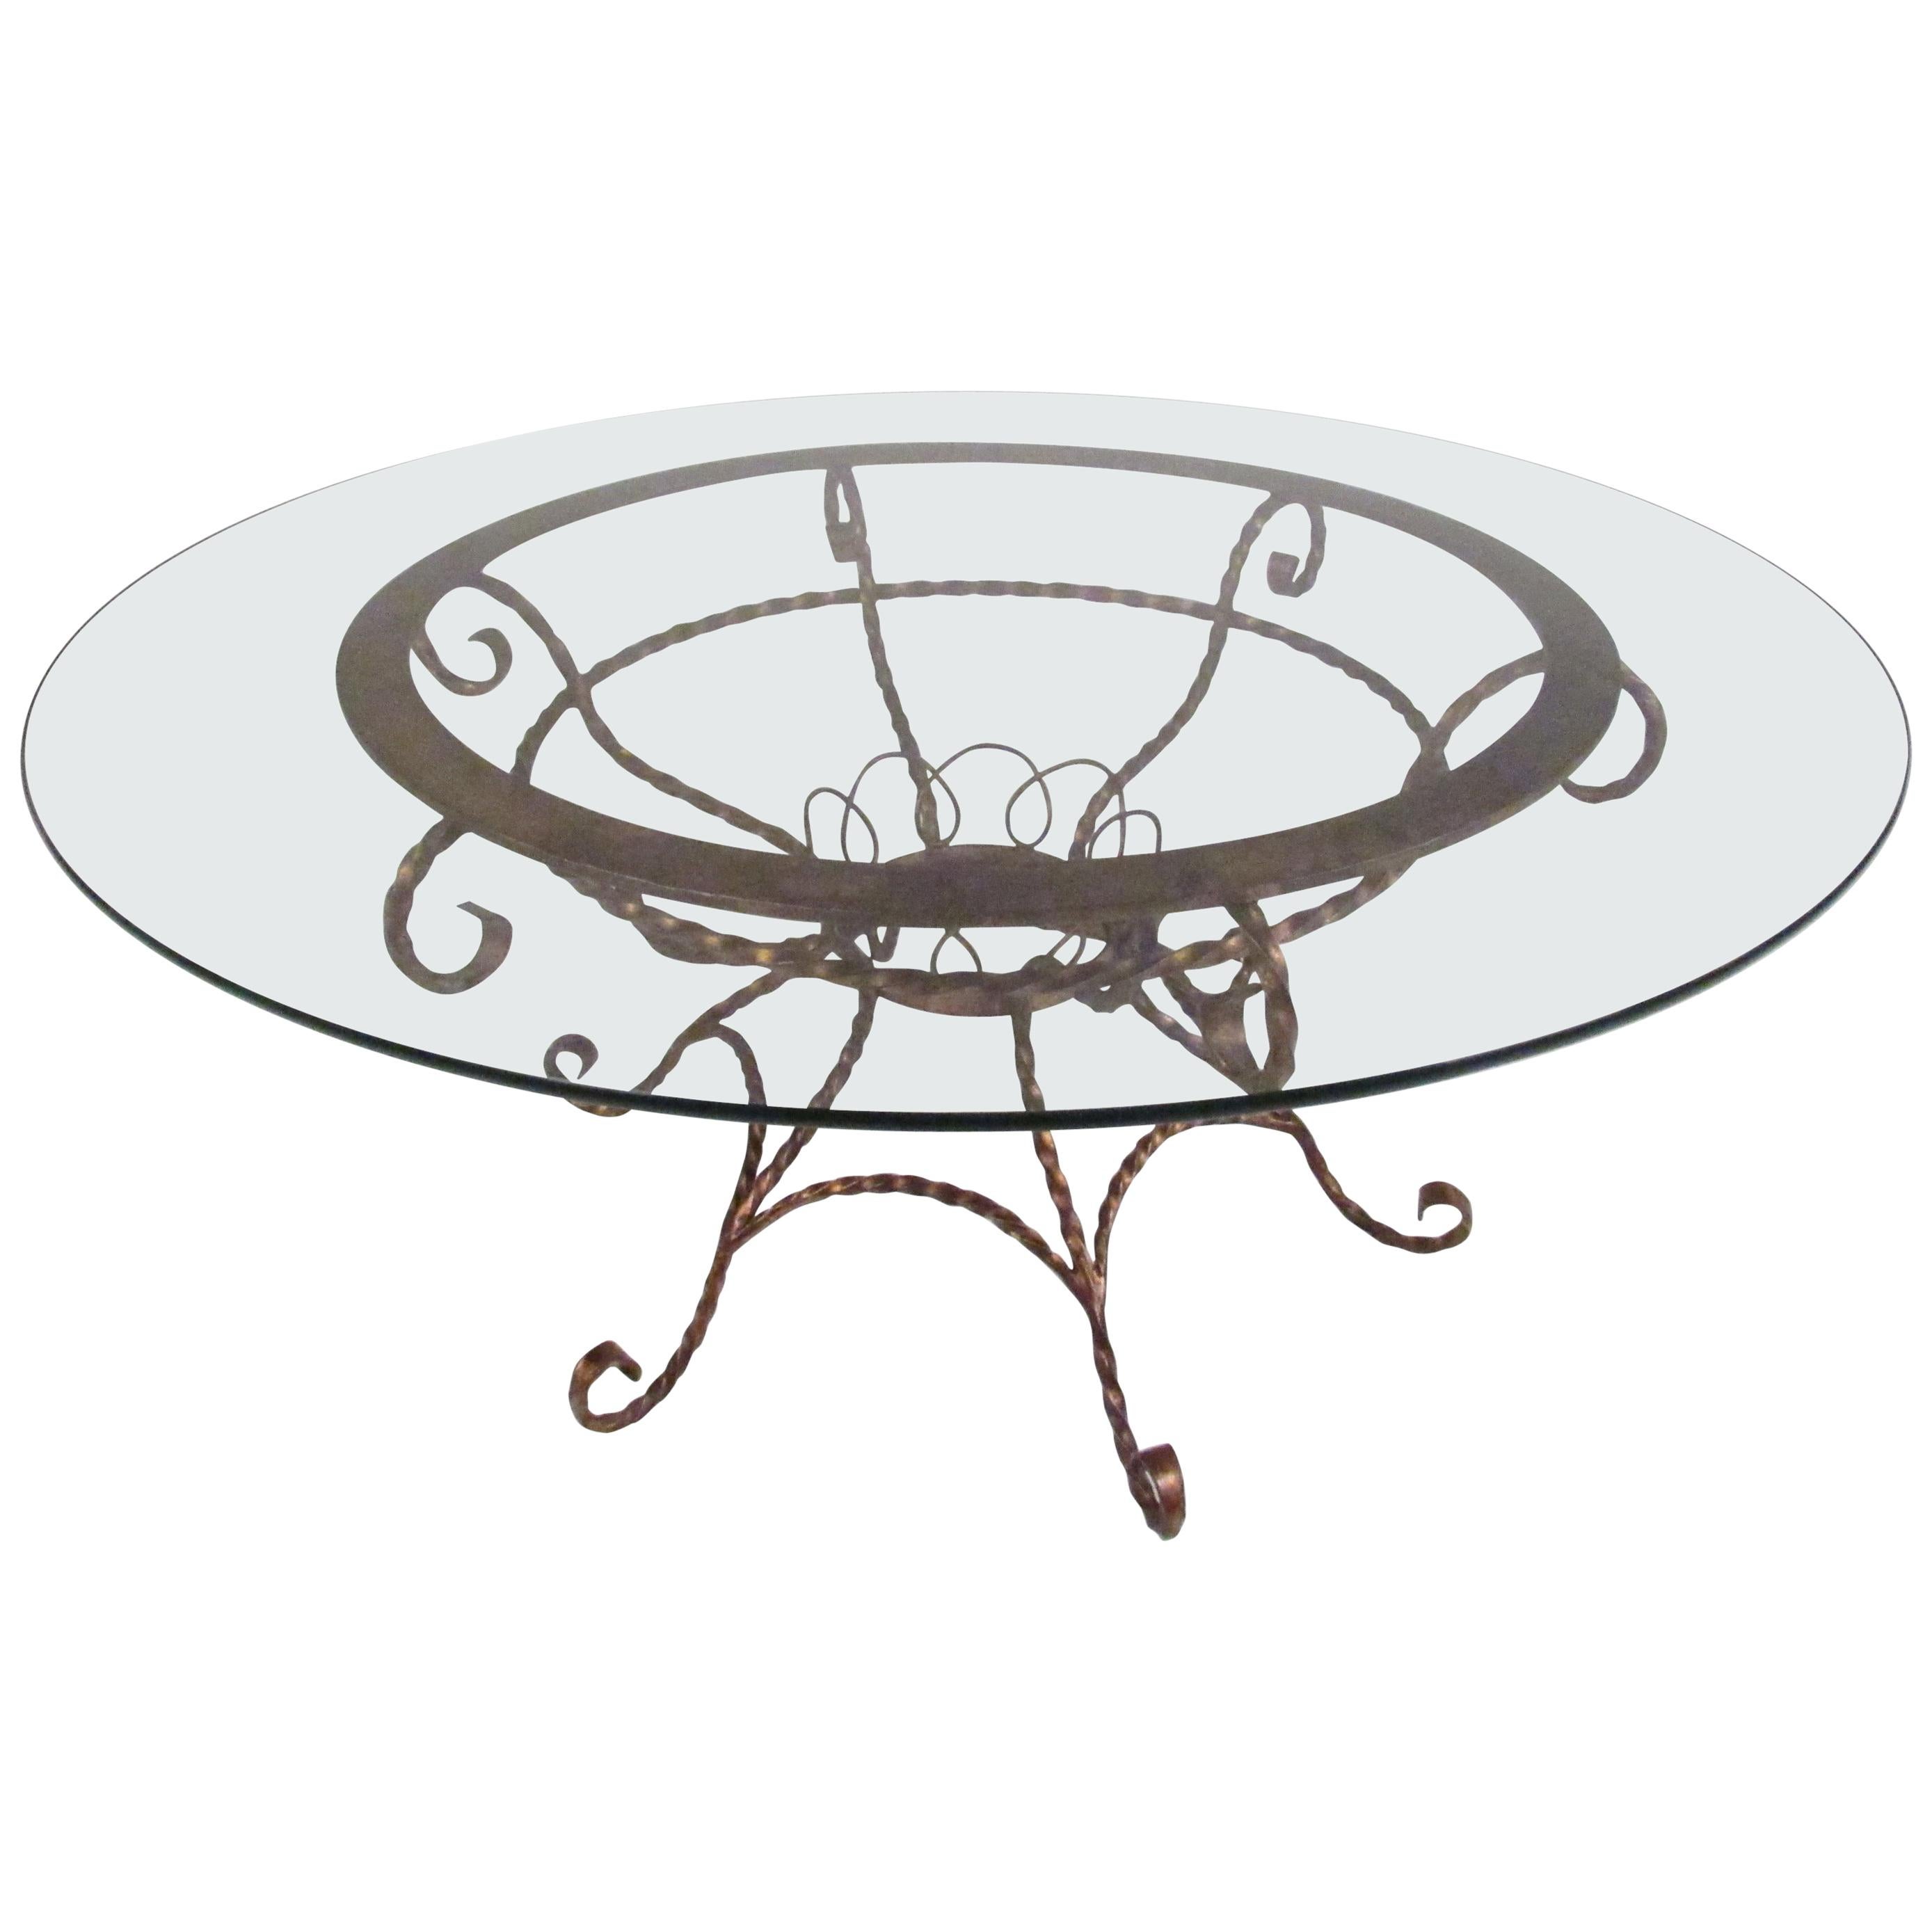 Elegant Vintage Wrought Iron Coffee Table with a Glass Top